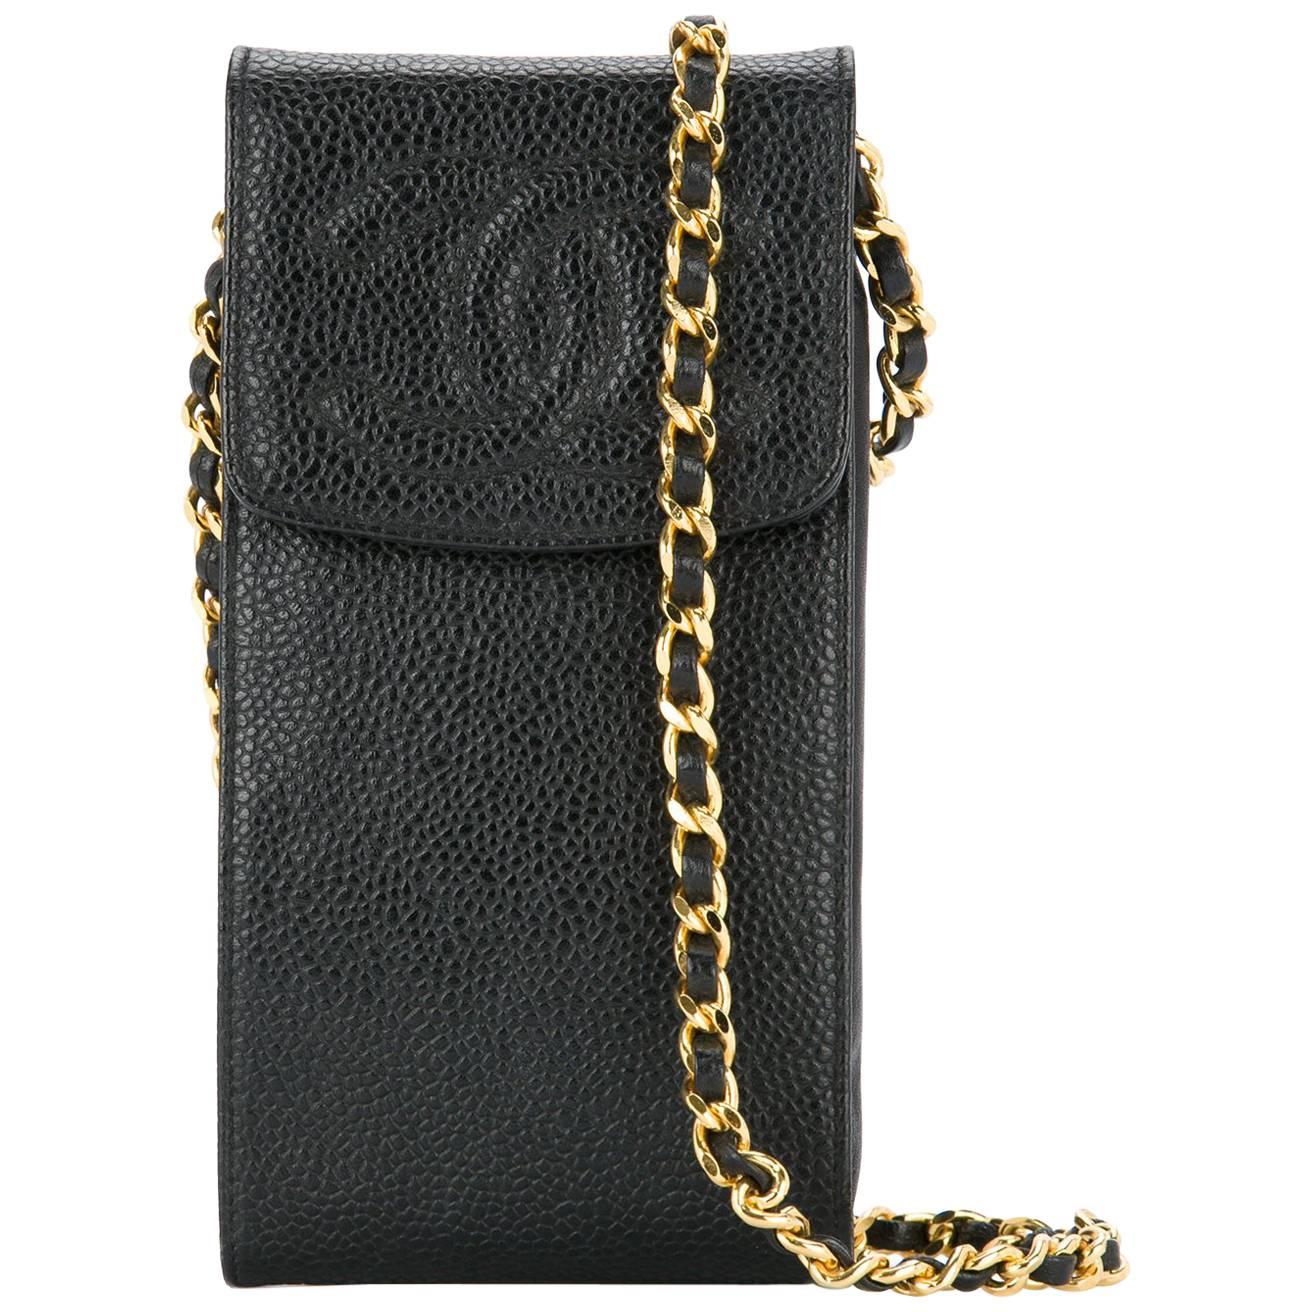 Chanel Black Caviar Leather Gold Cell Phone Travel Crossbody Shoulder Flap Bag